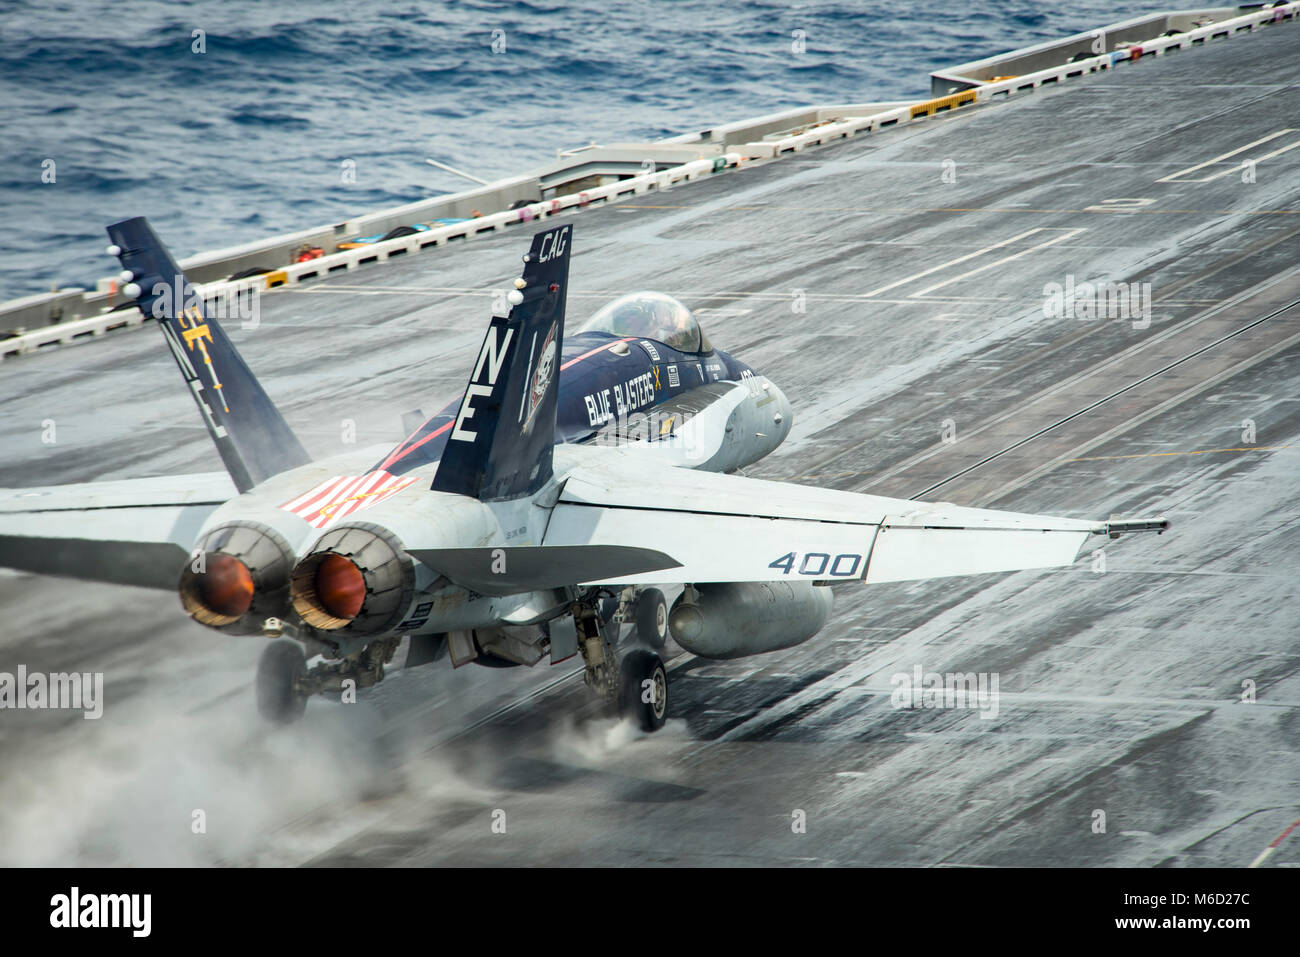 180227-N-WE240-0119  SOUTH CHINA SEA (Feb. 27, 2018) An F/A-18C Super Hornet assigned to the “Kestrels” of Strike Fighter Squadron (VFA) 137 takes off from the Nimitz-class aircraft carrier USS Carl Vinson (CVN 70). The Carl Vinson Strike Group is operating in the western Pacific during a regularly scheduled deployment. (U.S. Navy photo by Mass Communication Specialist 3rd Class Elton Charles Wheeler/Released) Stock Photo